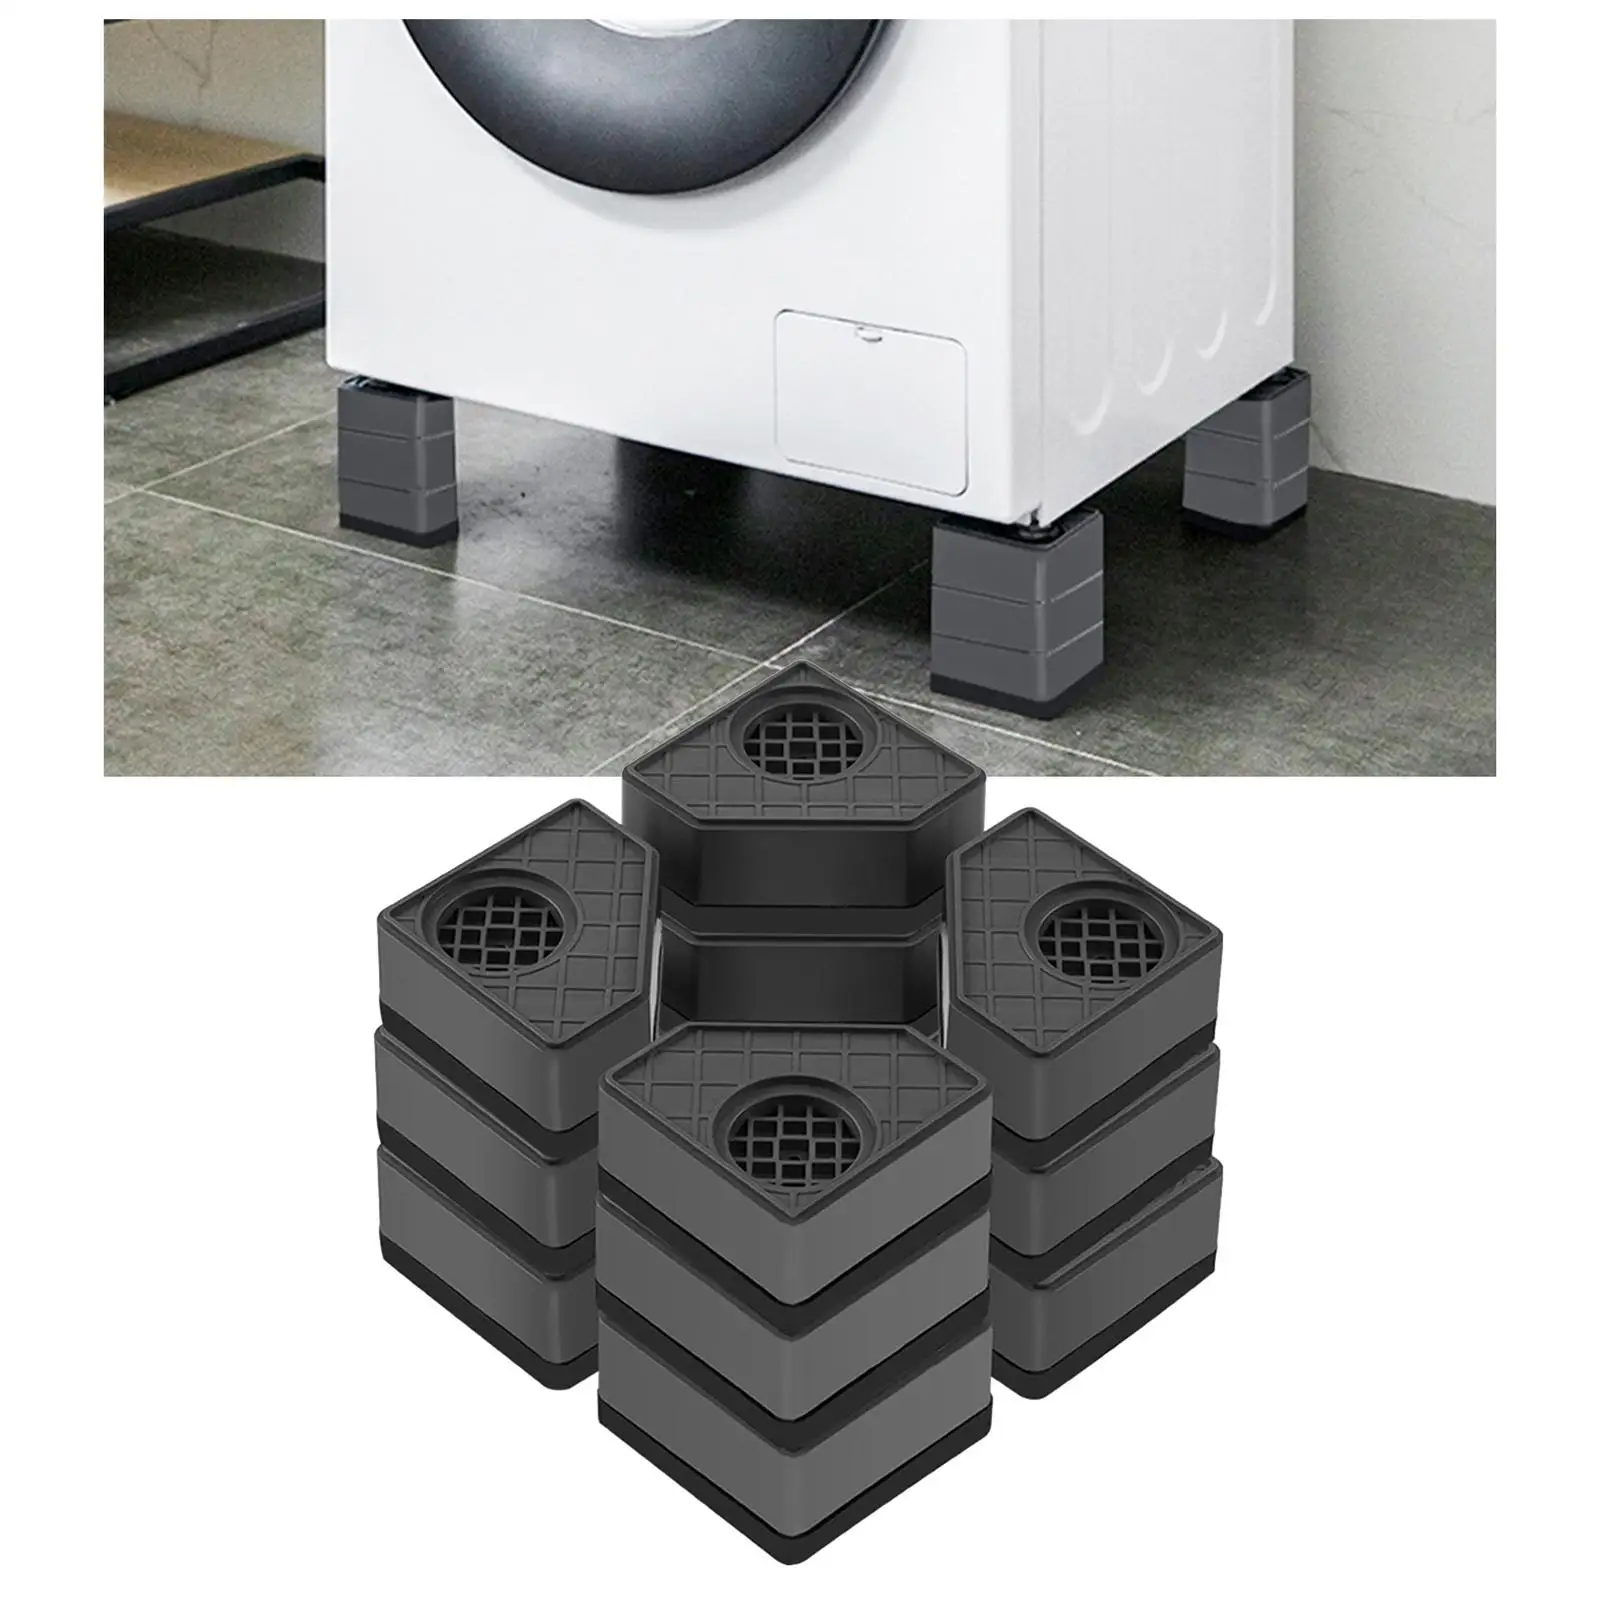 4x Anti Vibration Pads for Washing Machine, Noise Cancelling Mat Furniture Foot